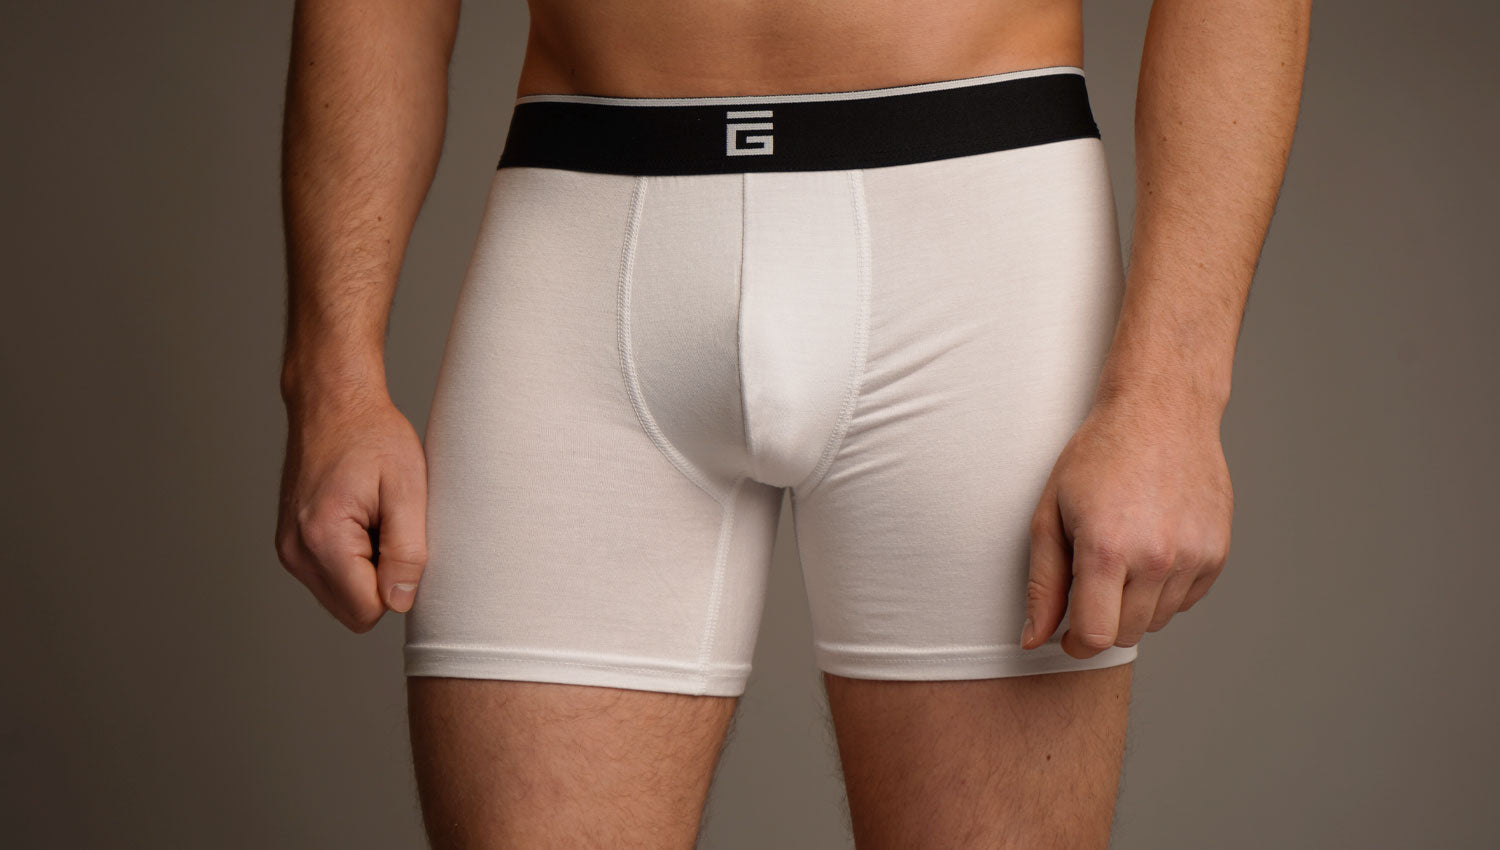 Are Bamboo Boxers Better? A Closer Look at Giovici Bamboo Boxers